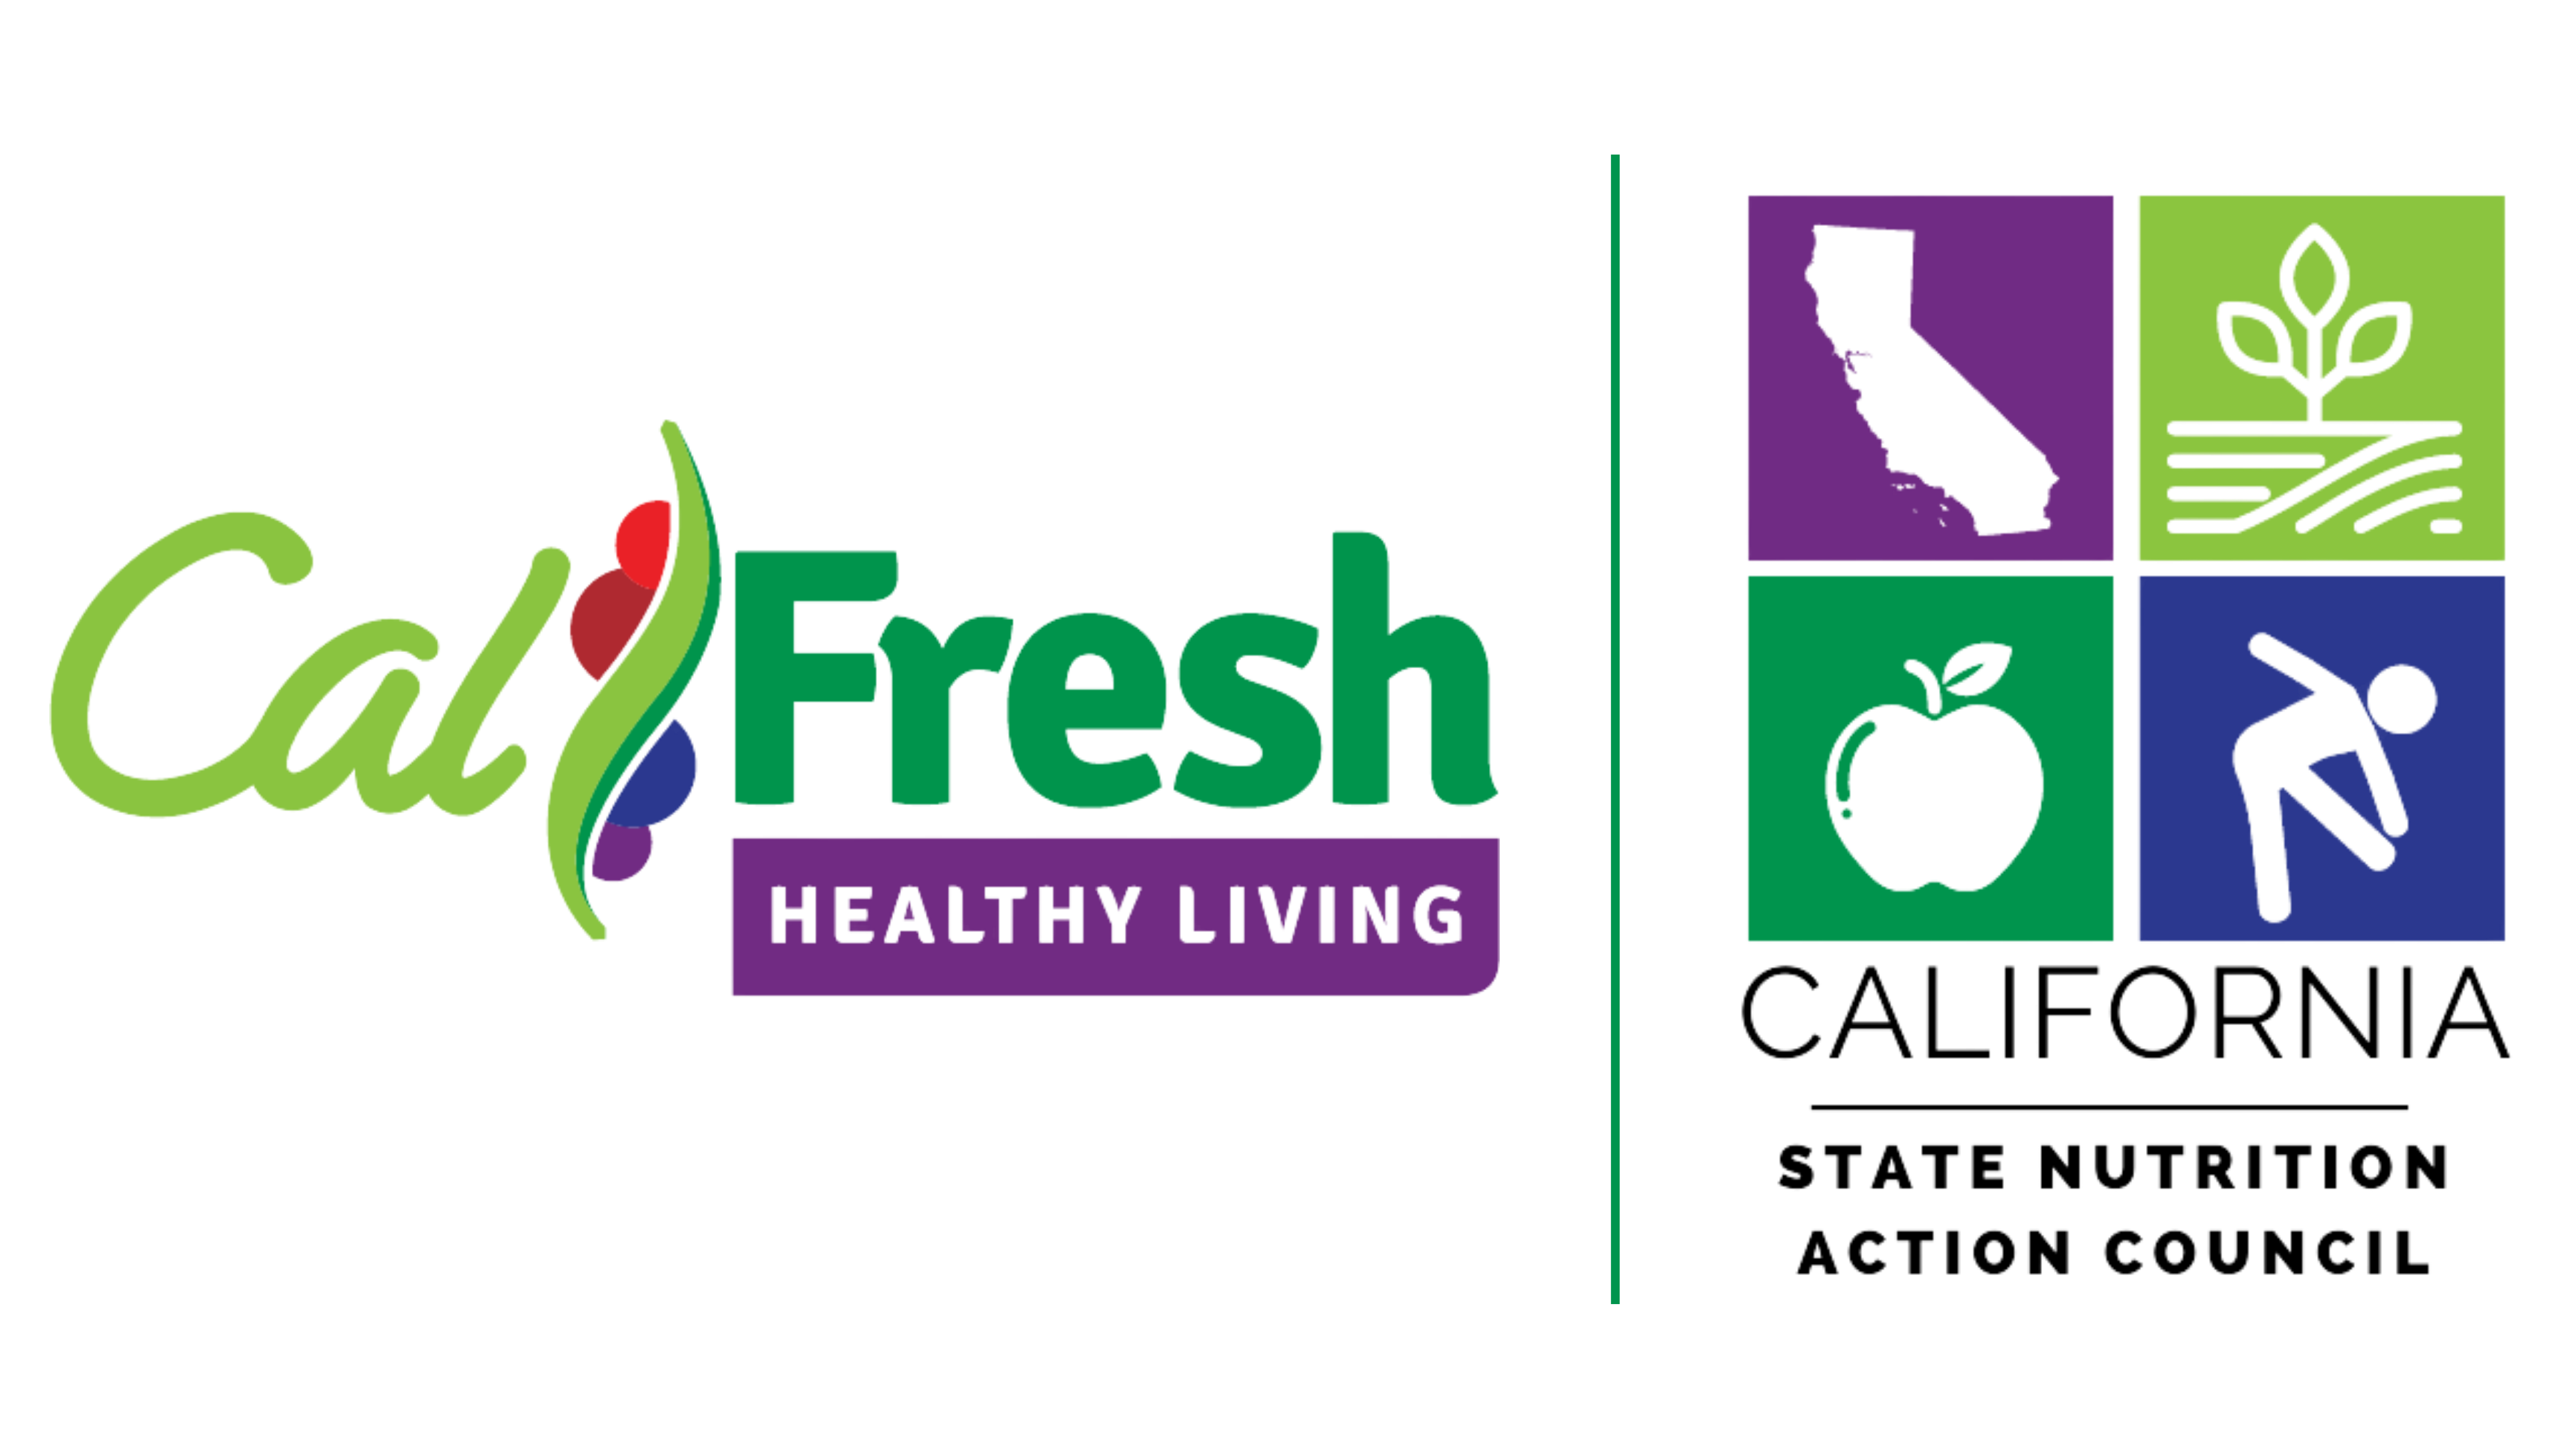 CalFresh Healthy Living and SNAC Logo Center for Wellness and Nutrition